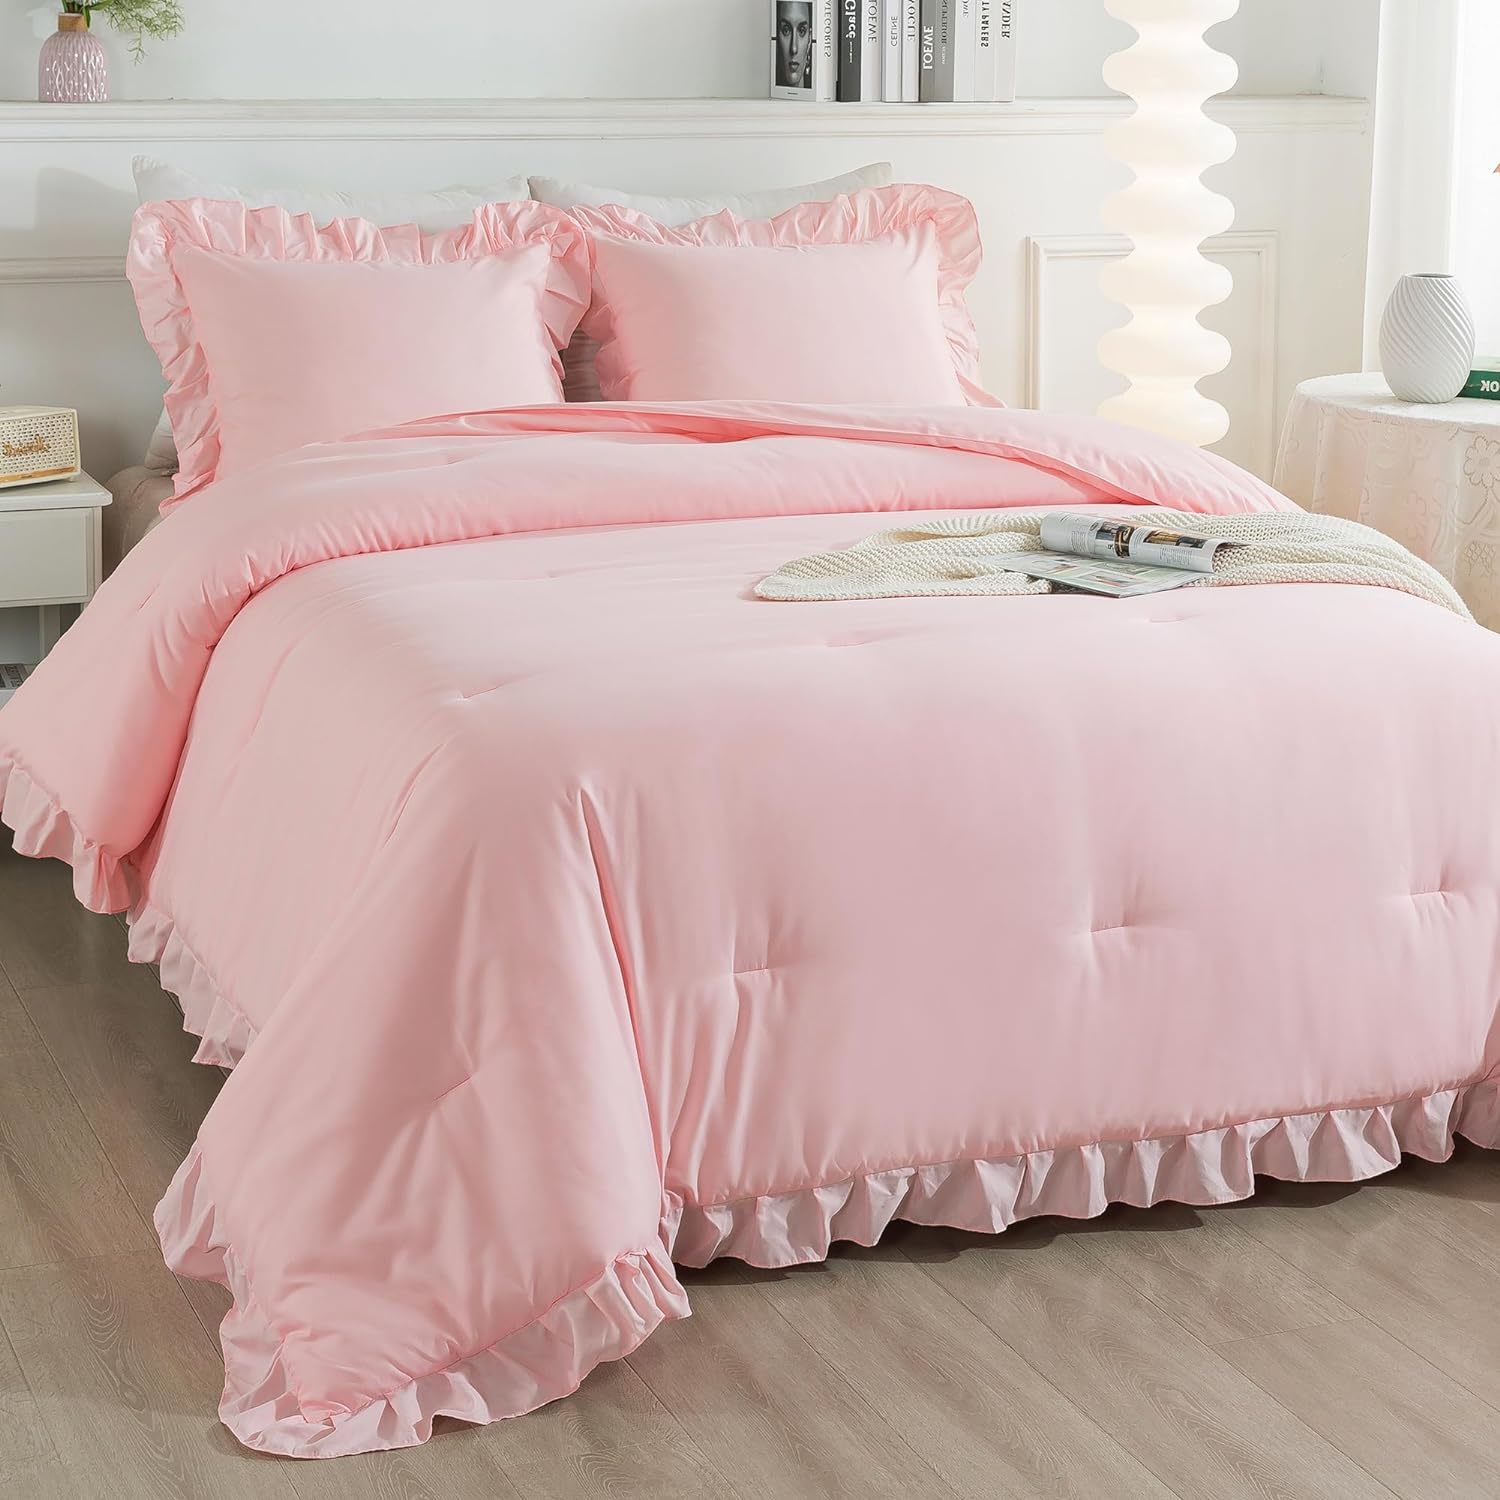 Primary image for Pink Comforter Set Queen Size, 3 Pieces Solid Pink Ruffle Shabby Chic Comforter 